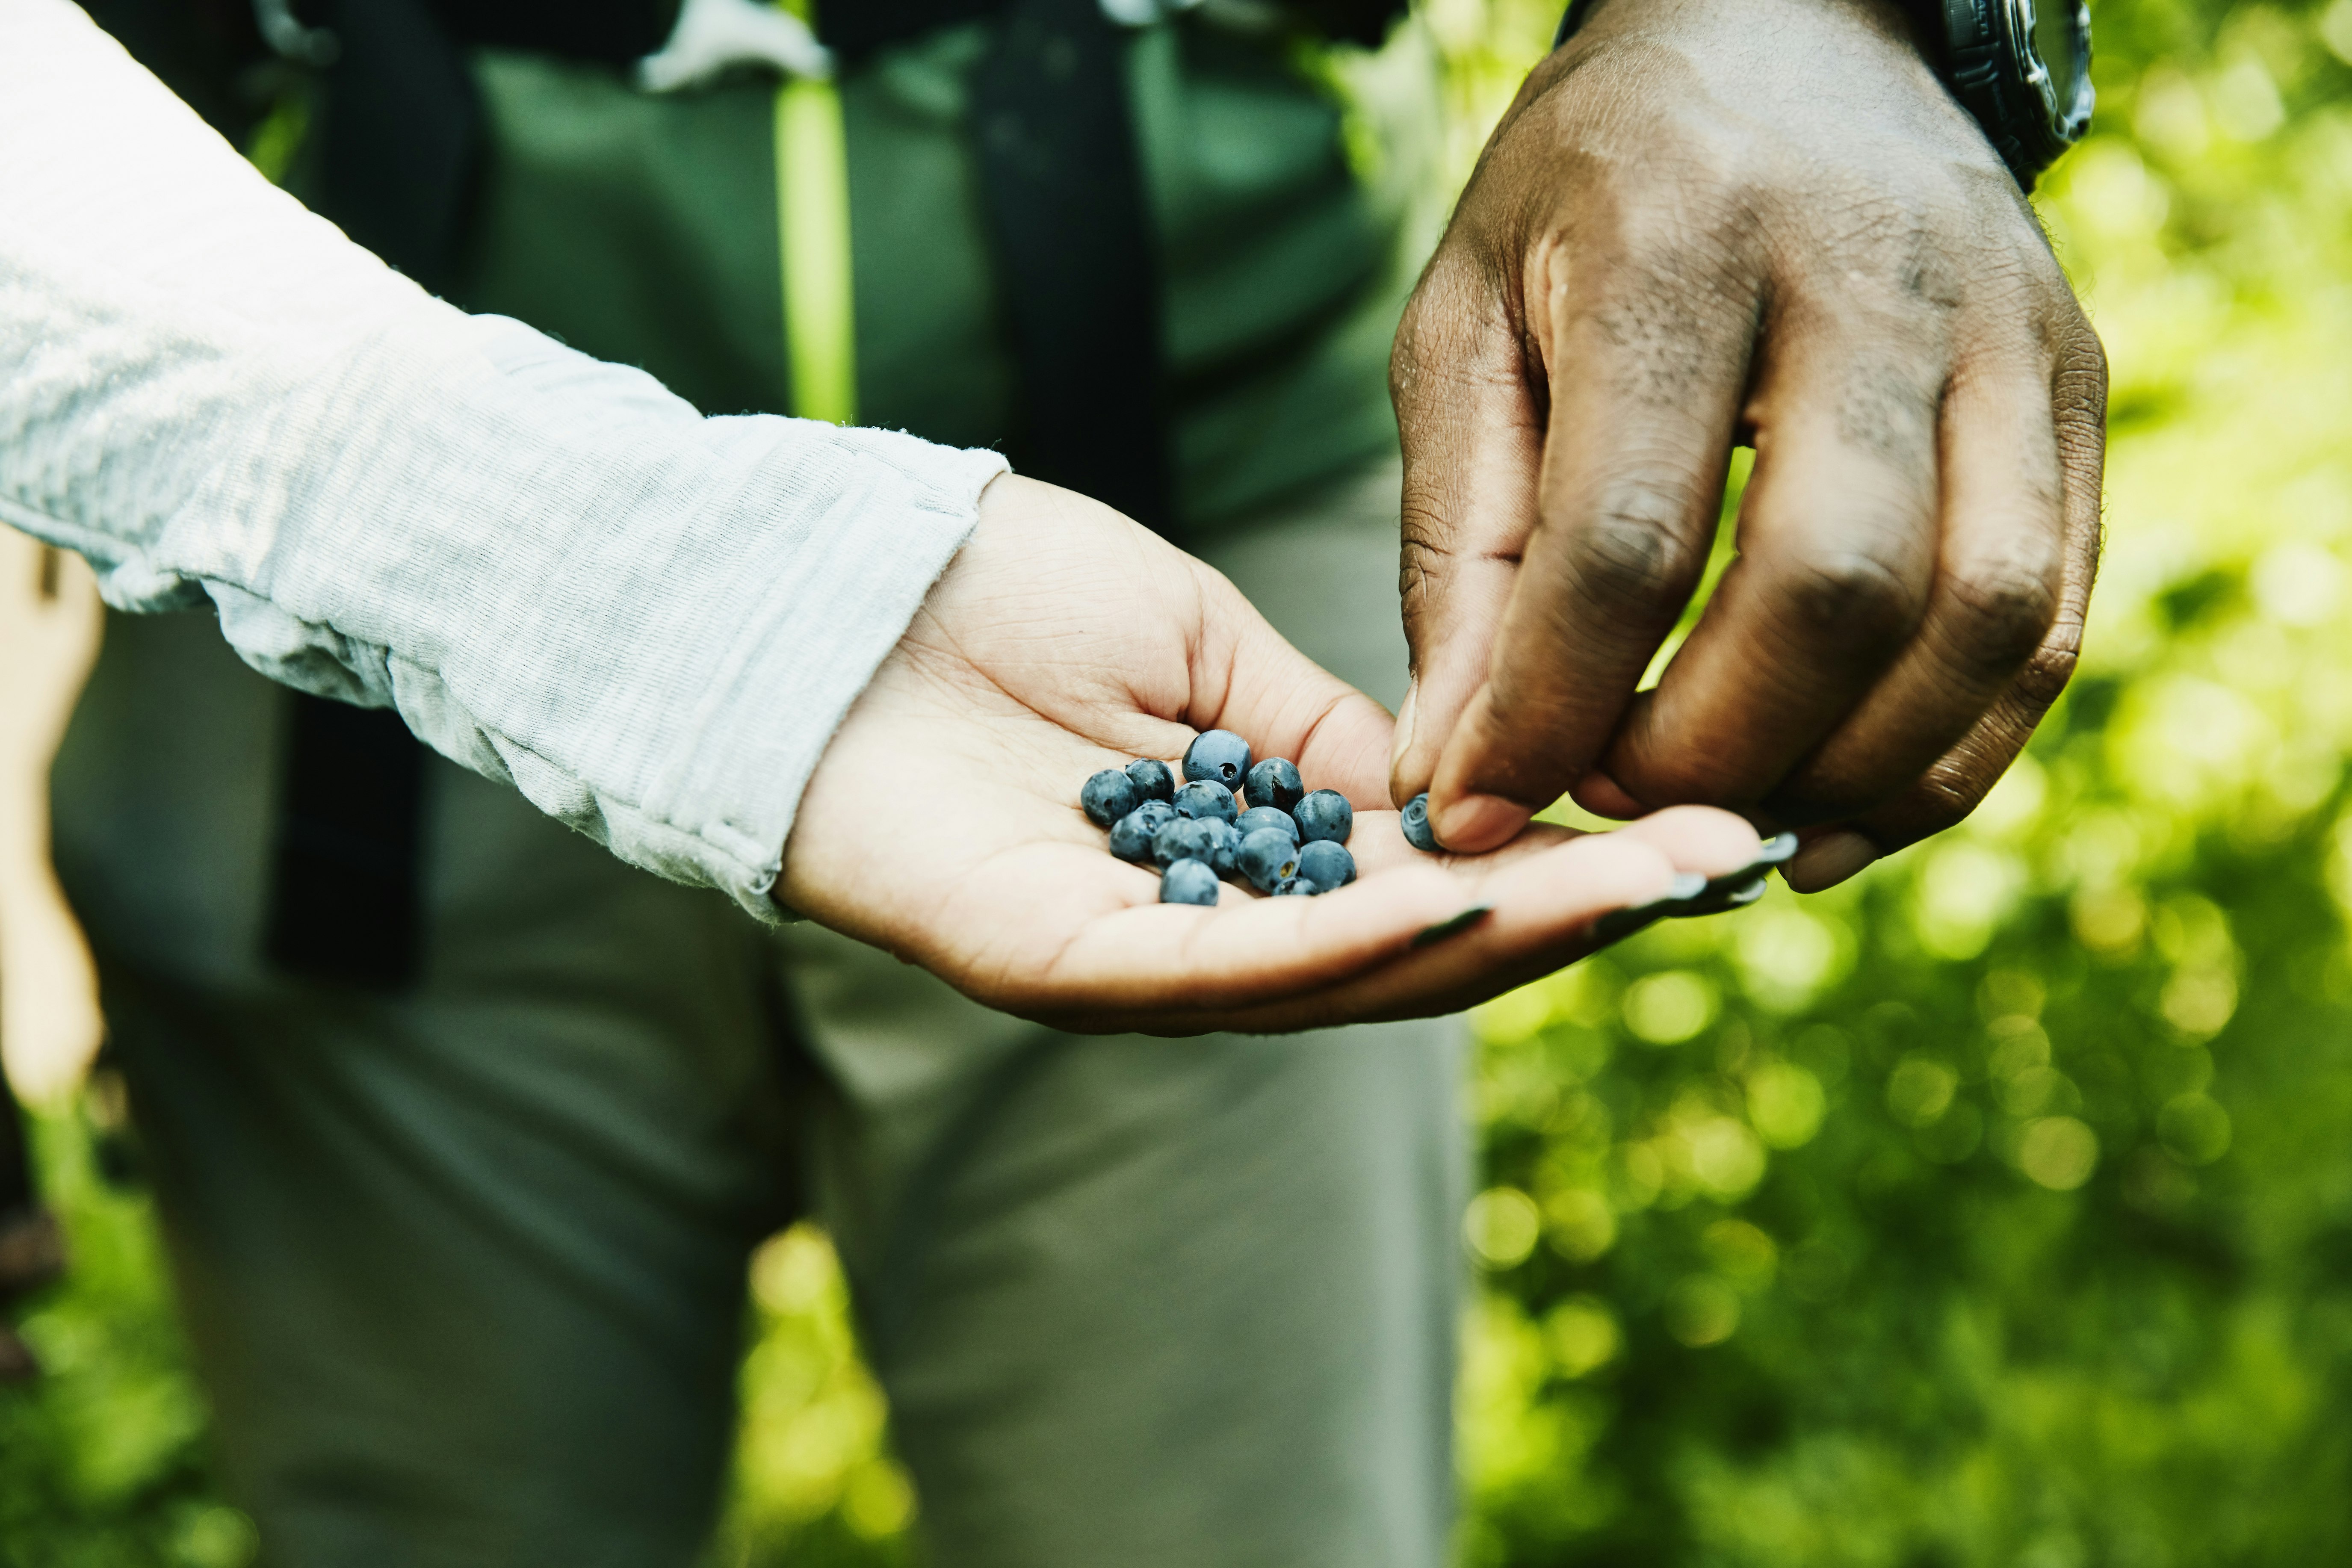 A man's hand reaches to take a blueberry from a woman's cupped hand. Both appear to be wearing hiking clothes, and the blurred background is of foliage.